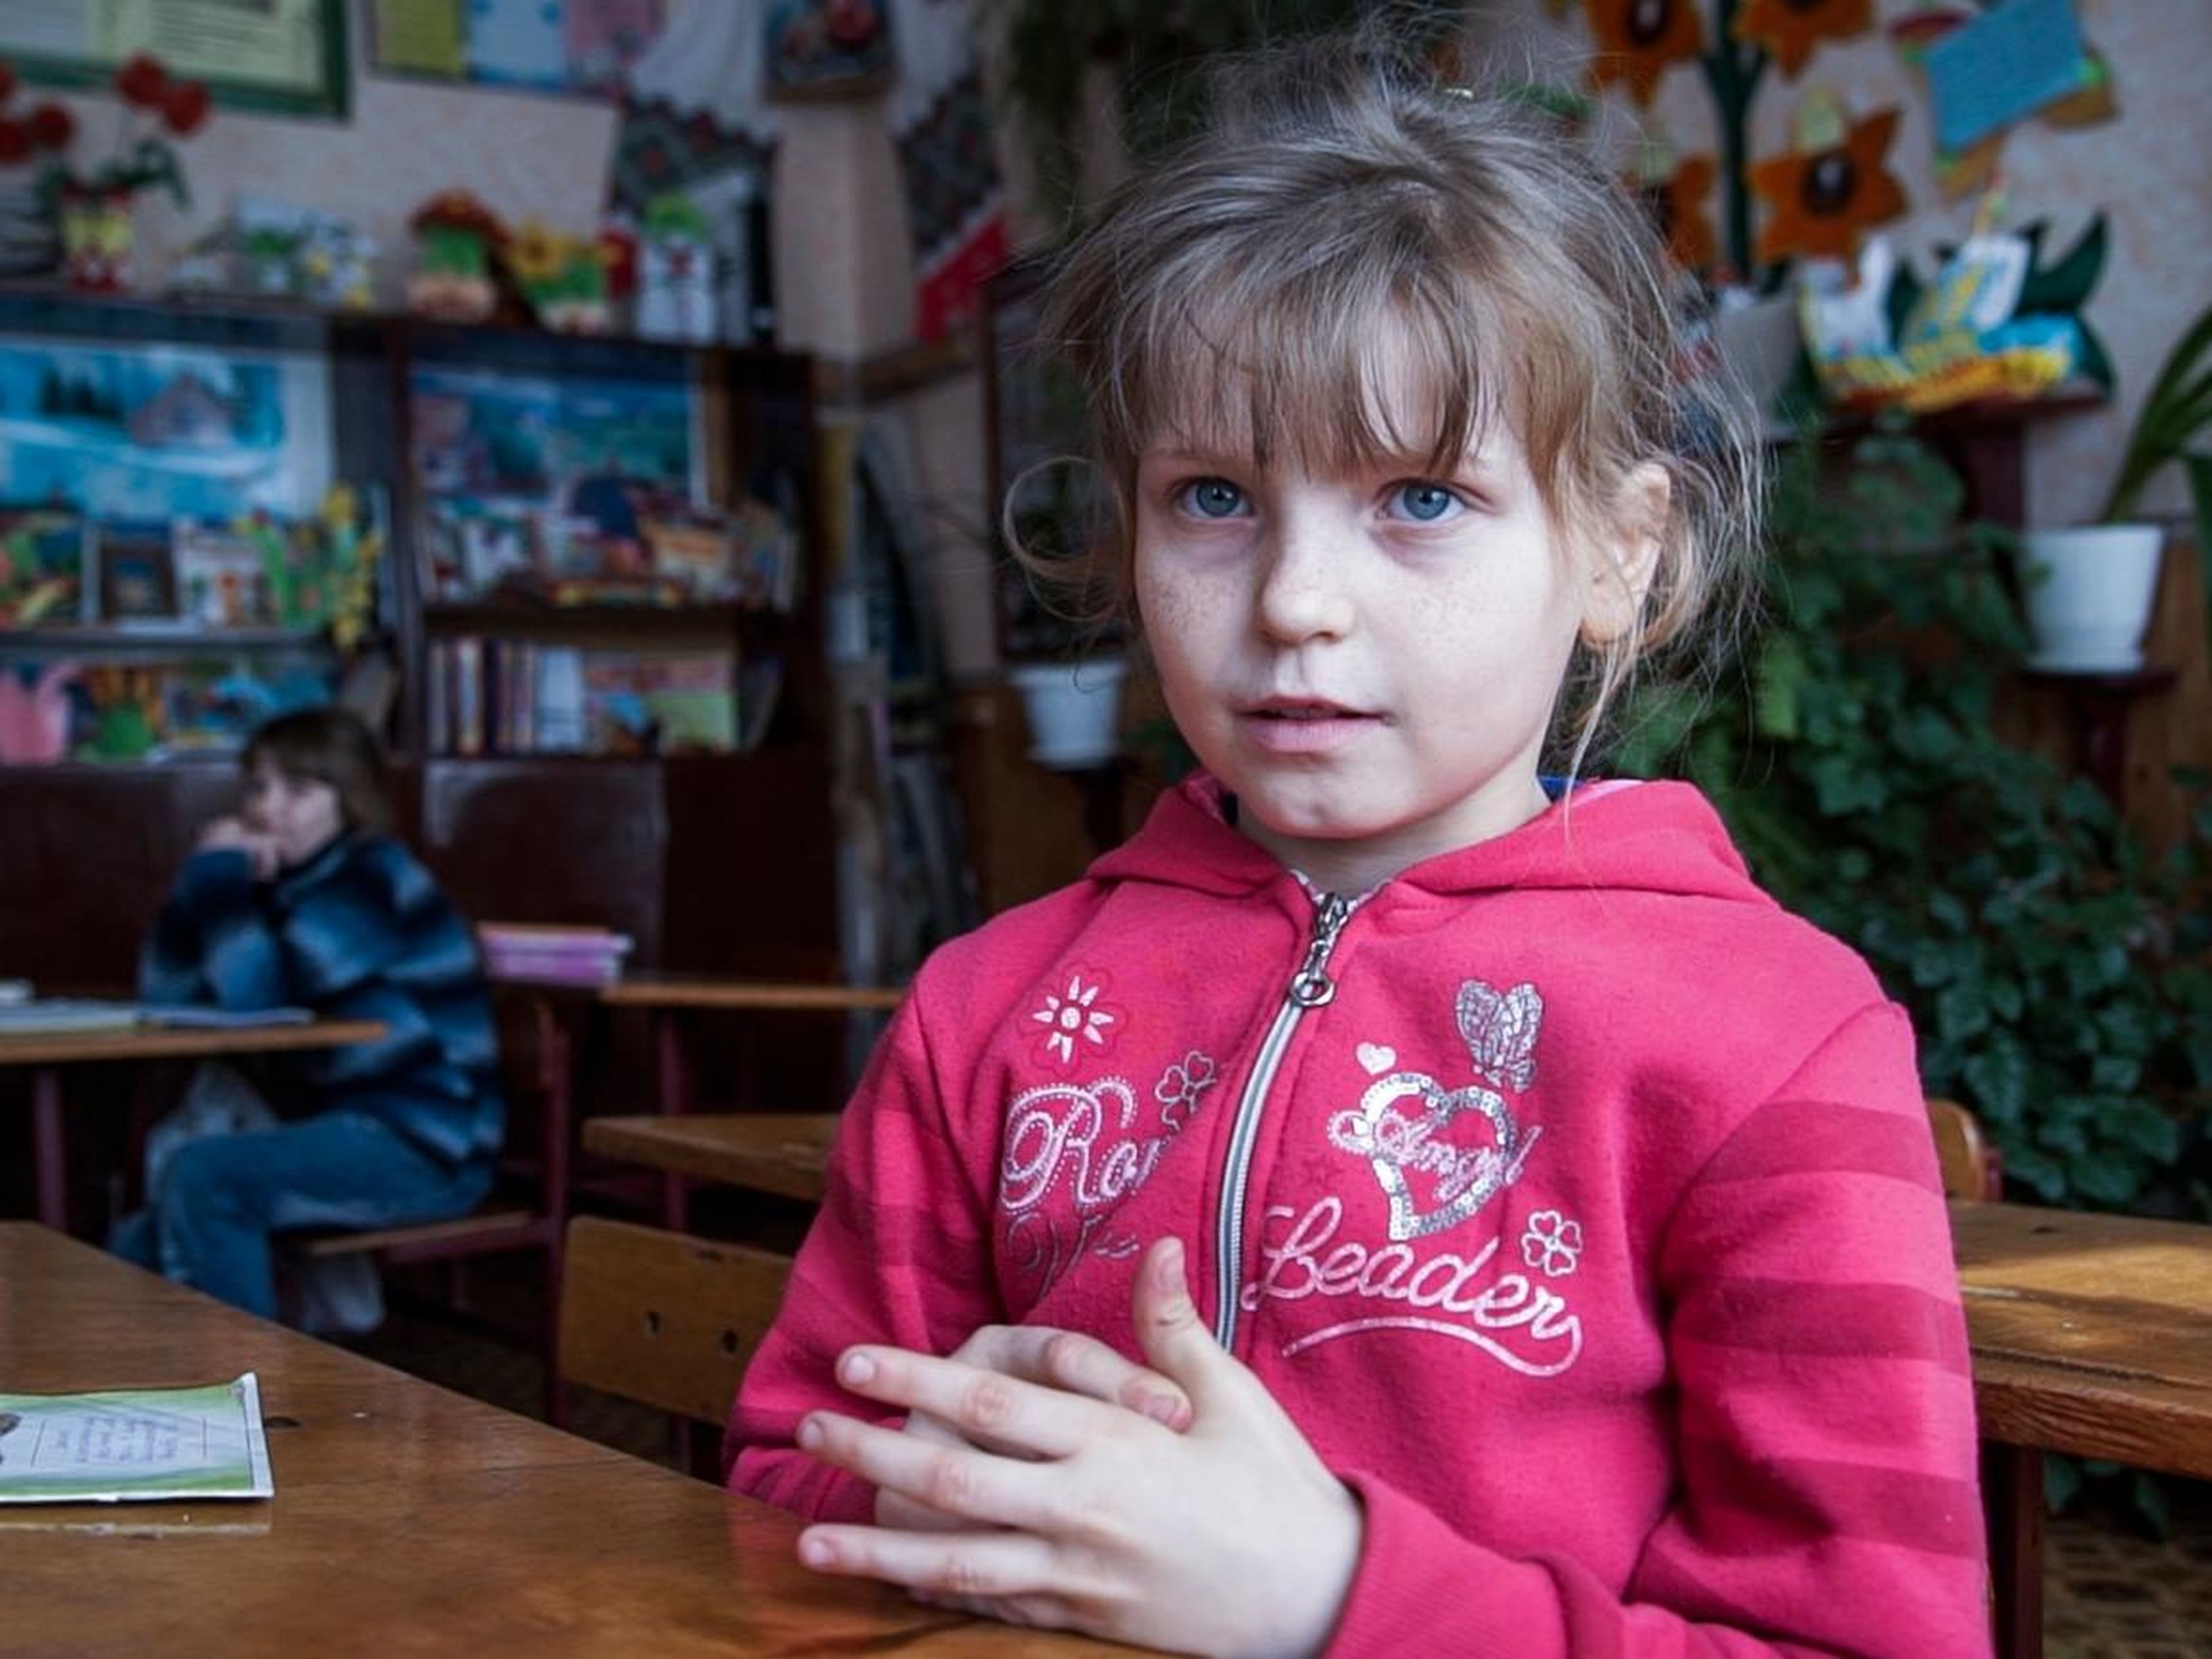 Nine-year-old Olesya Petrova lives in Zalyshany and told the AP that she often goes without lunch. She's fond of scrounging for berries and other tidbits in the forest, despite the potential radiation ingestion.